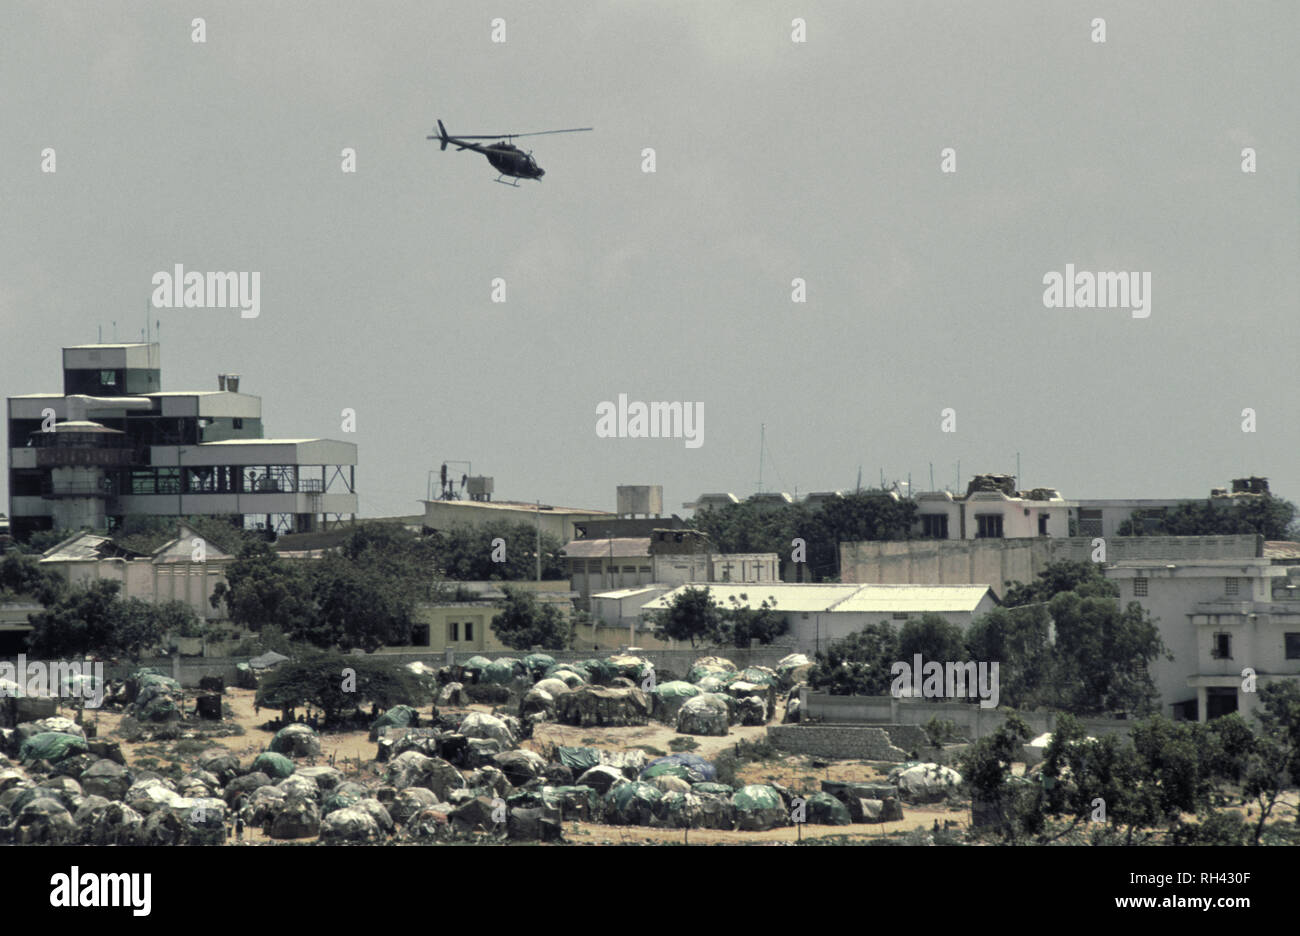 13th October 1993 A U.S. Army OH-58 Kiowa Scout Observation helicopter flies low above a tented refugee camp near the K4 roundabout in Mogadishu, Somalia. Stock Photo